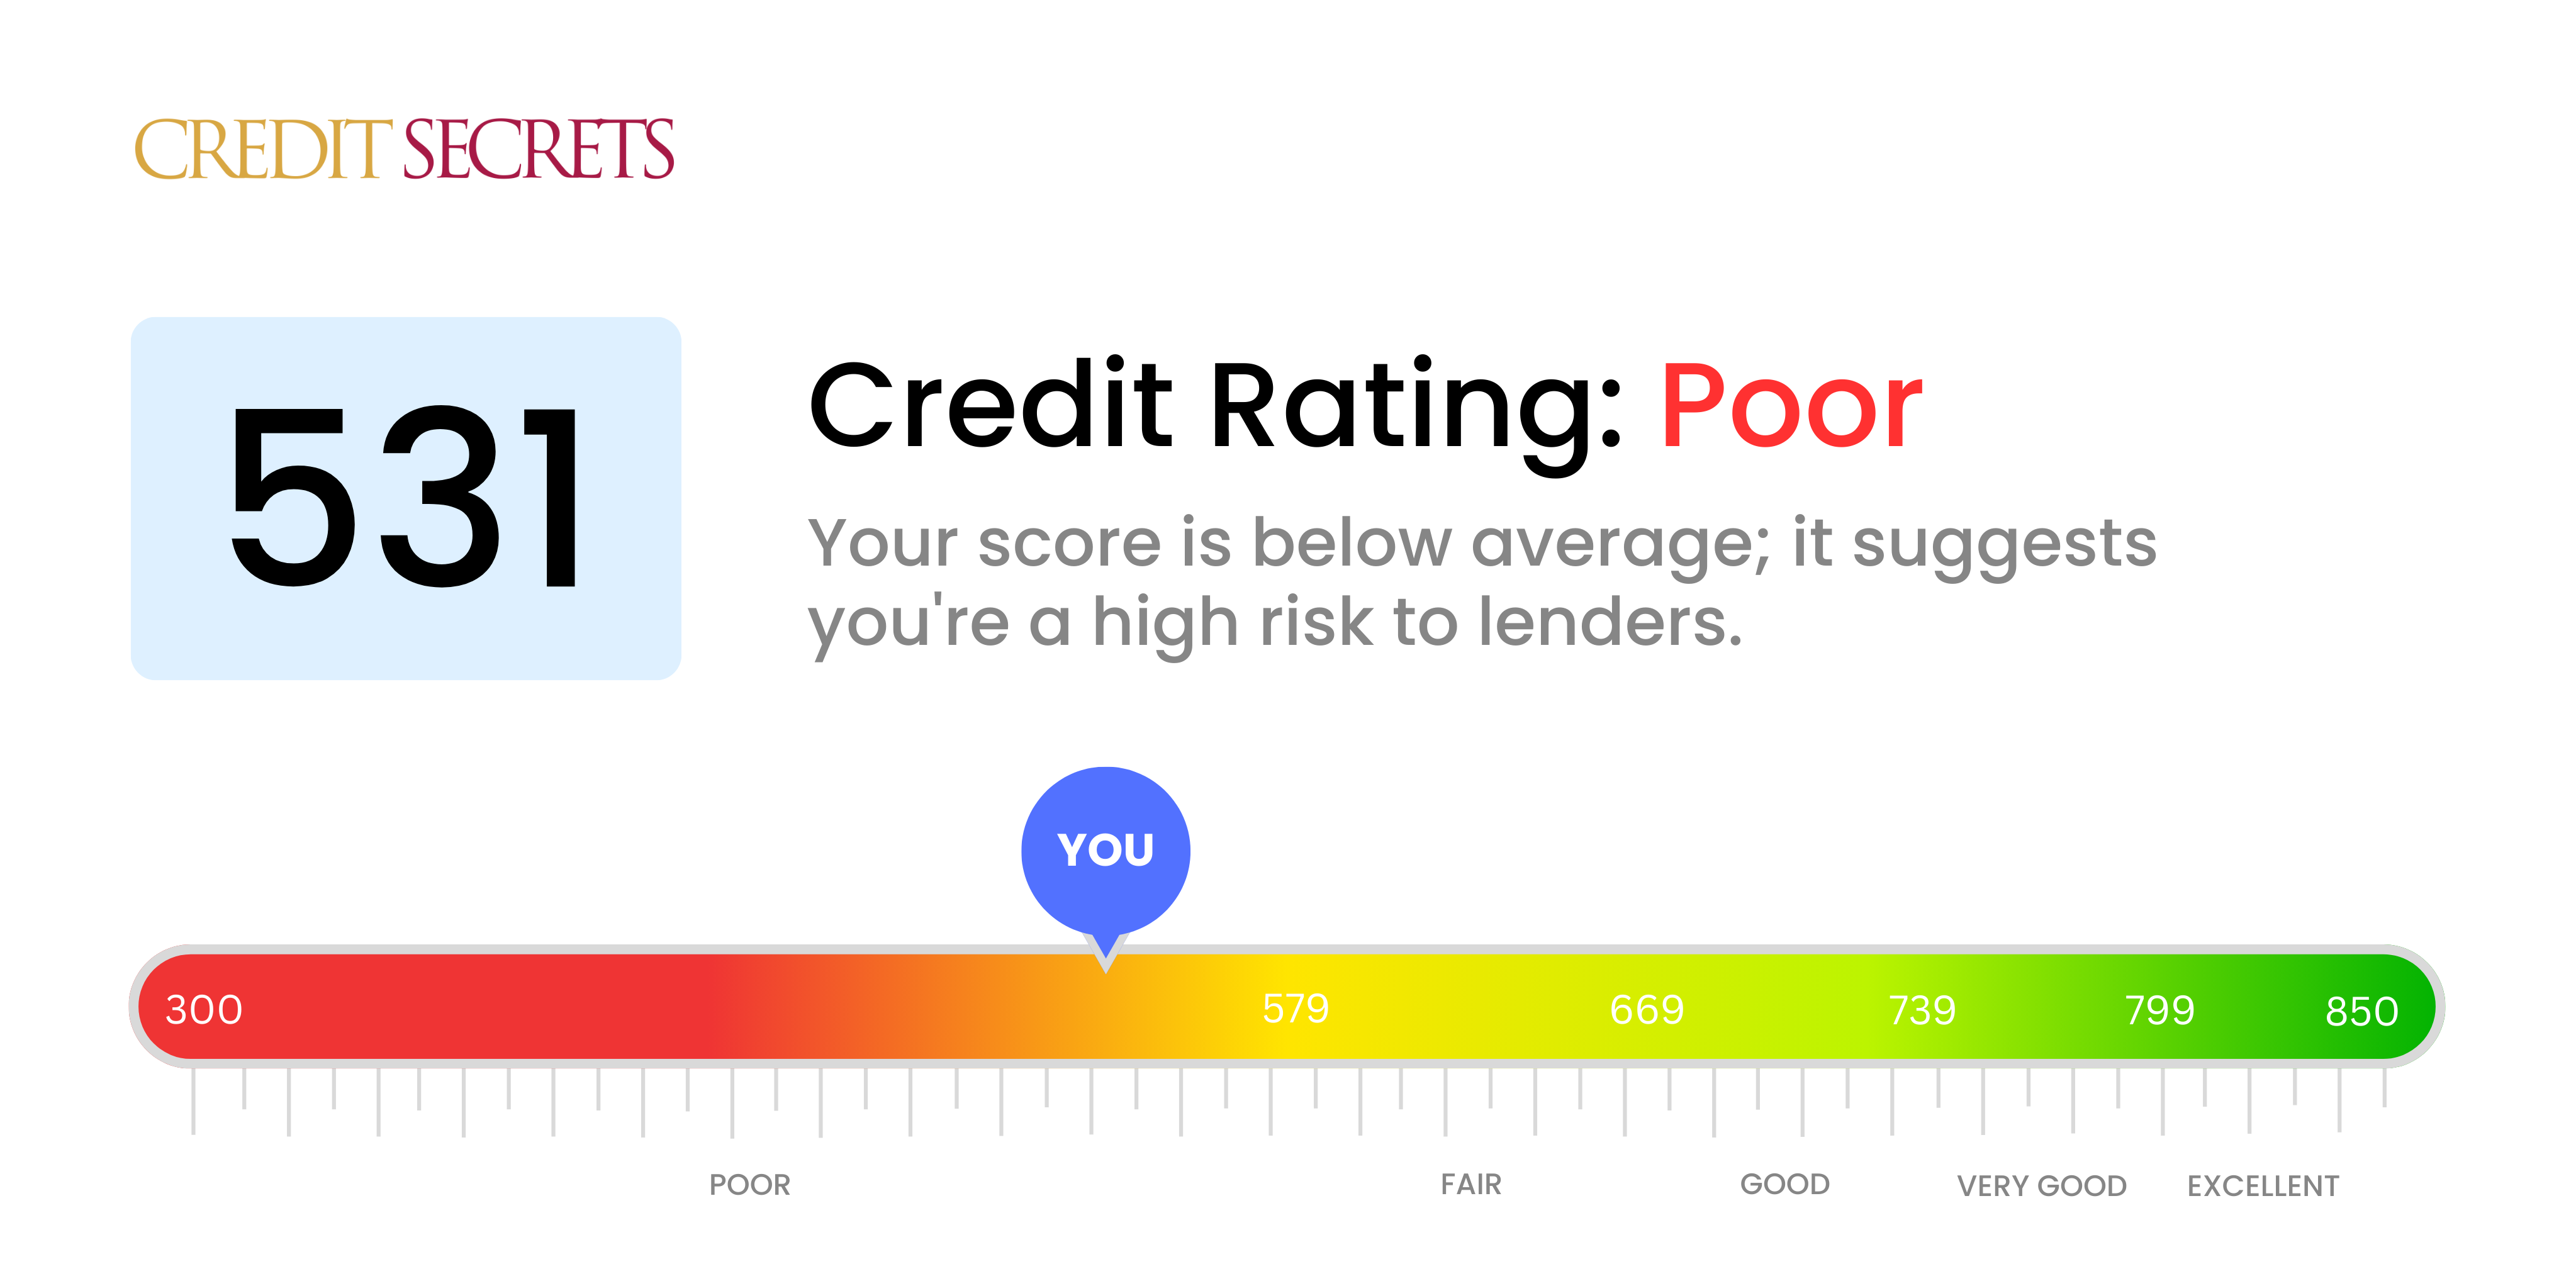 Is 531 a good credit score?